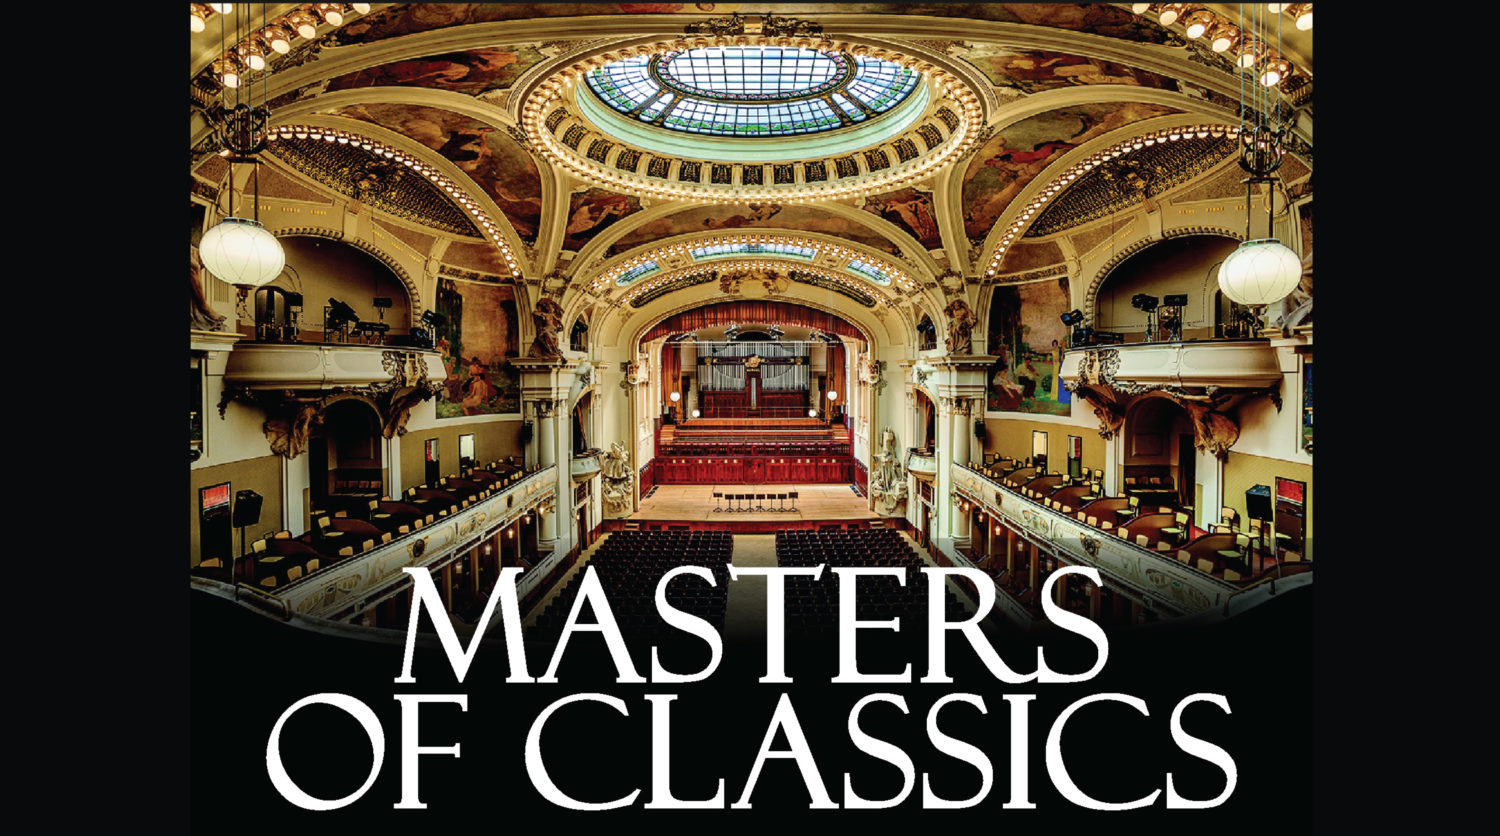 MASTERS OF CLASSICS IN THE MUNICIPAL HOUSE 20.03.2019